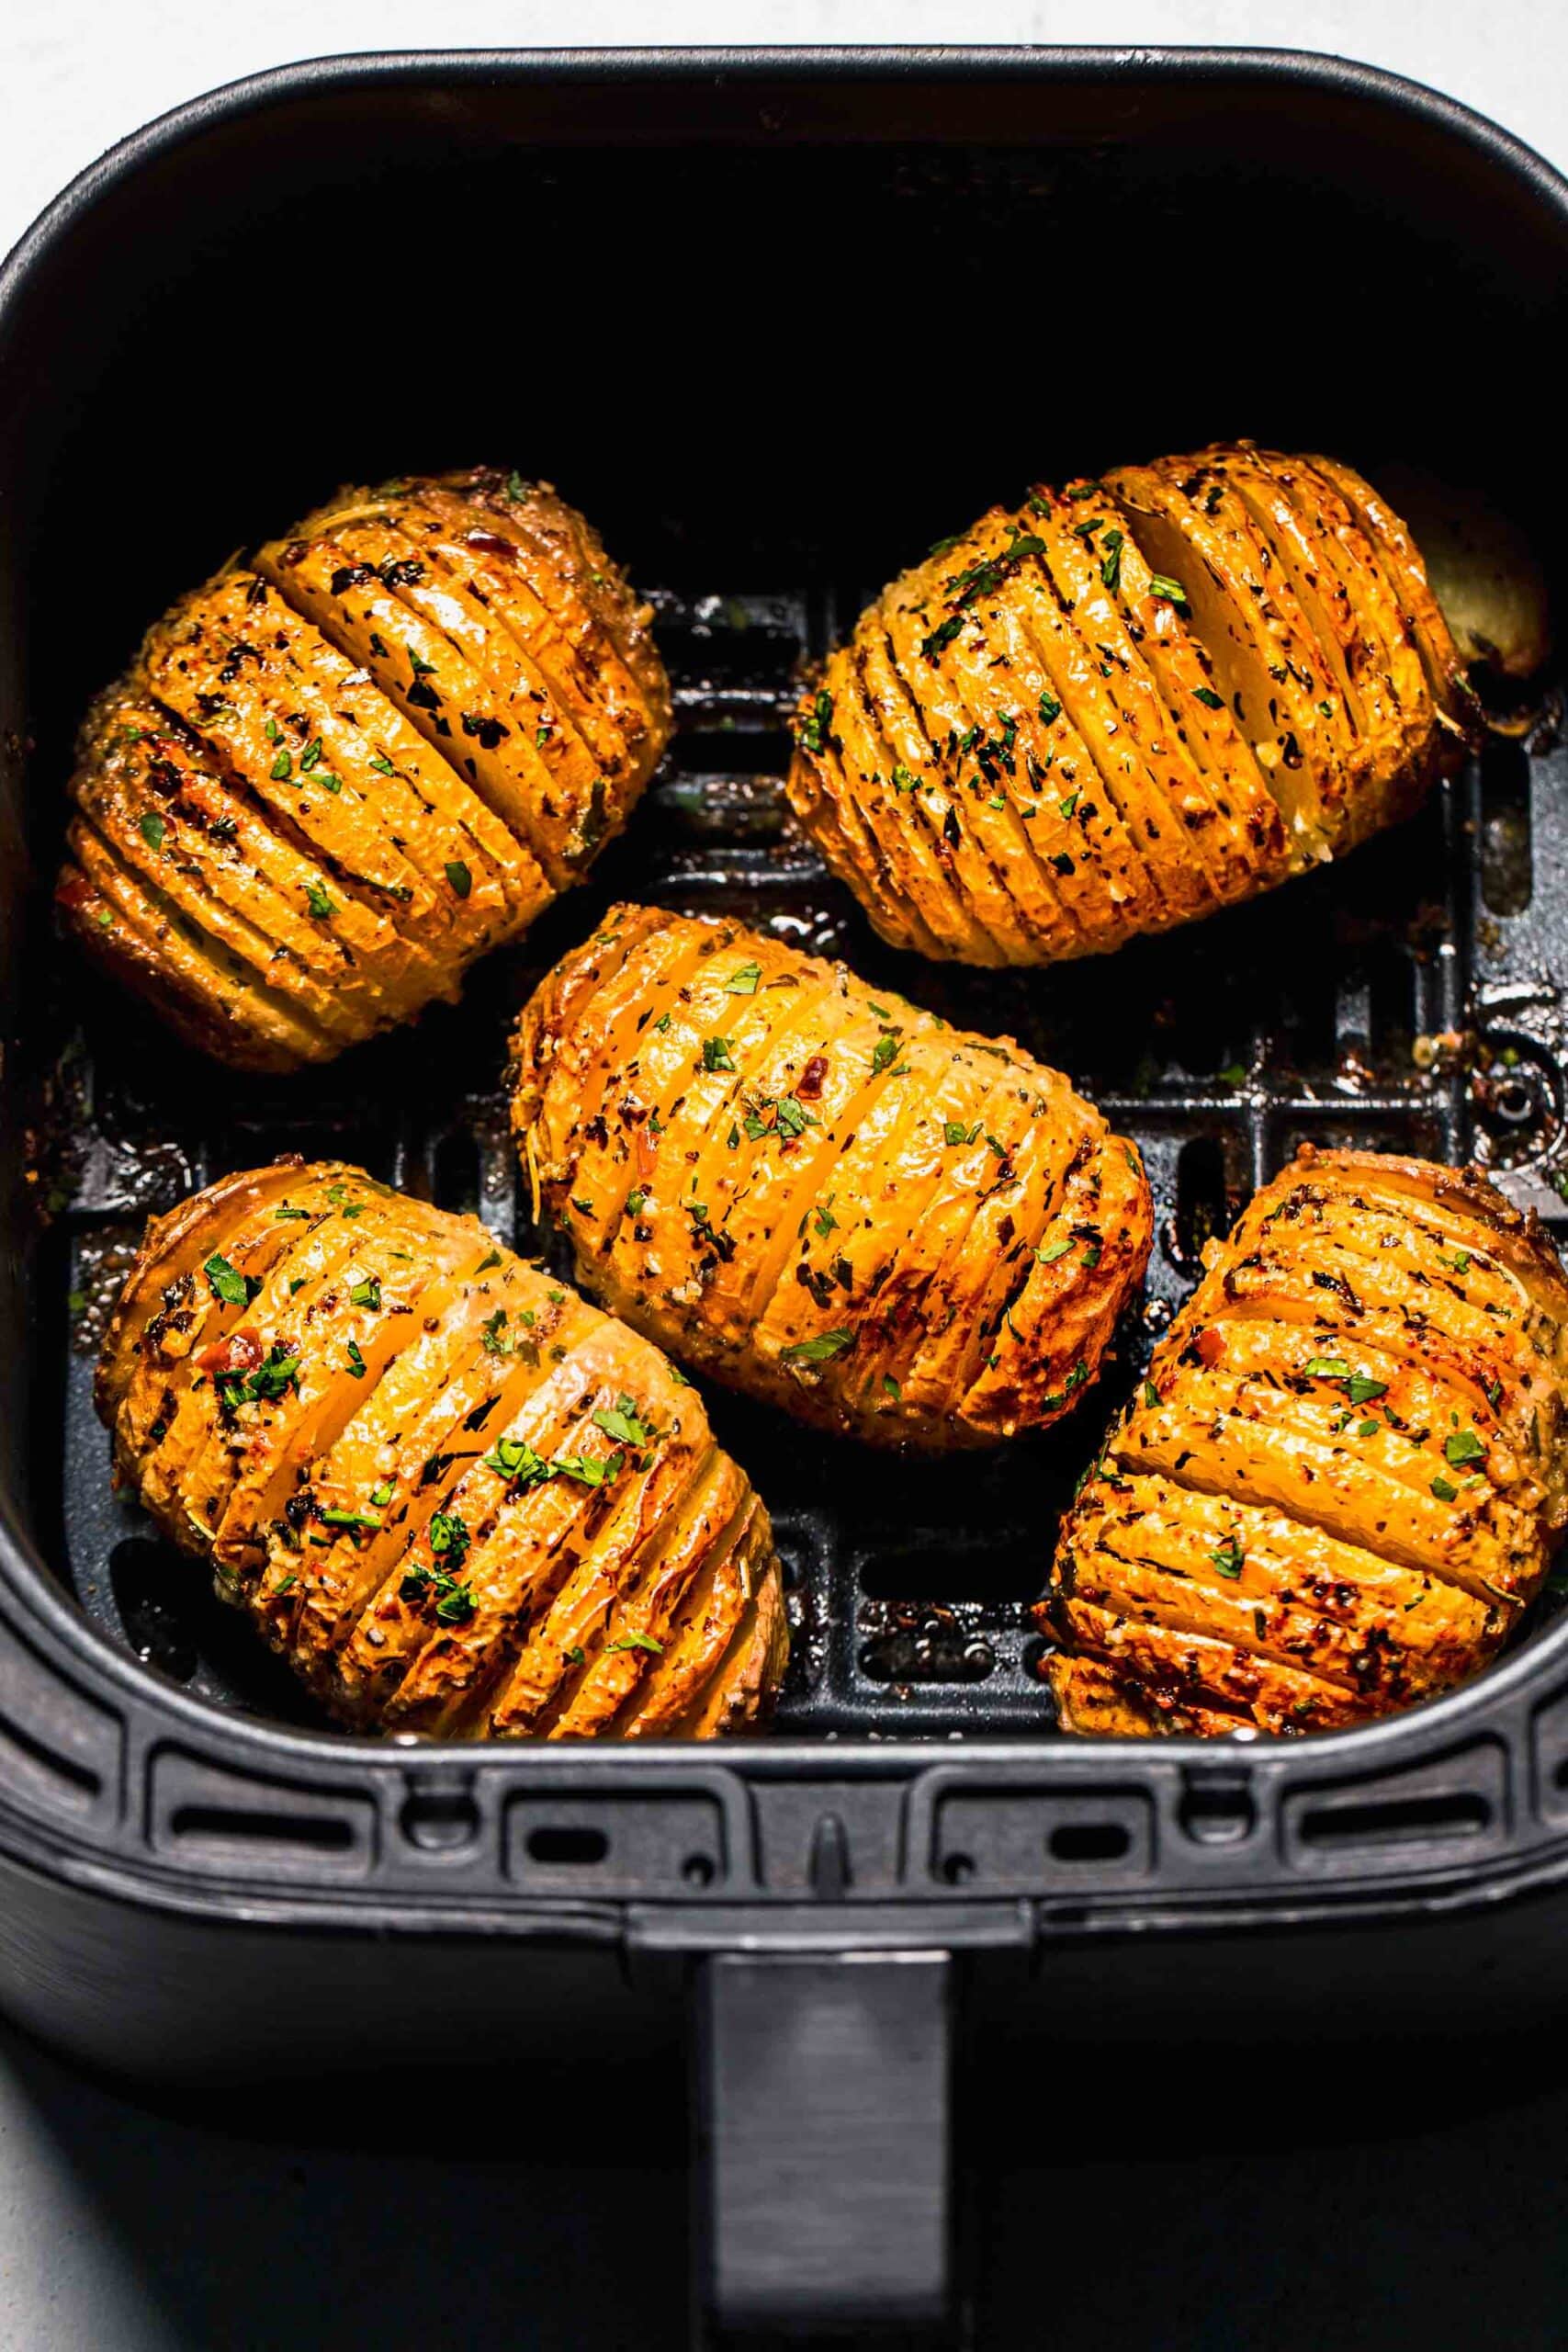 Cooked hasselback potatoes in air fryer basket.